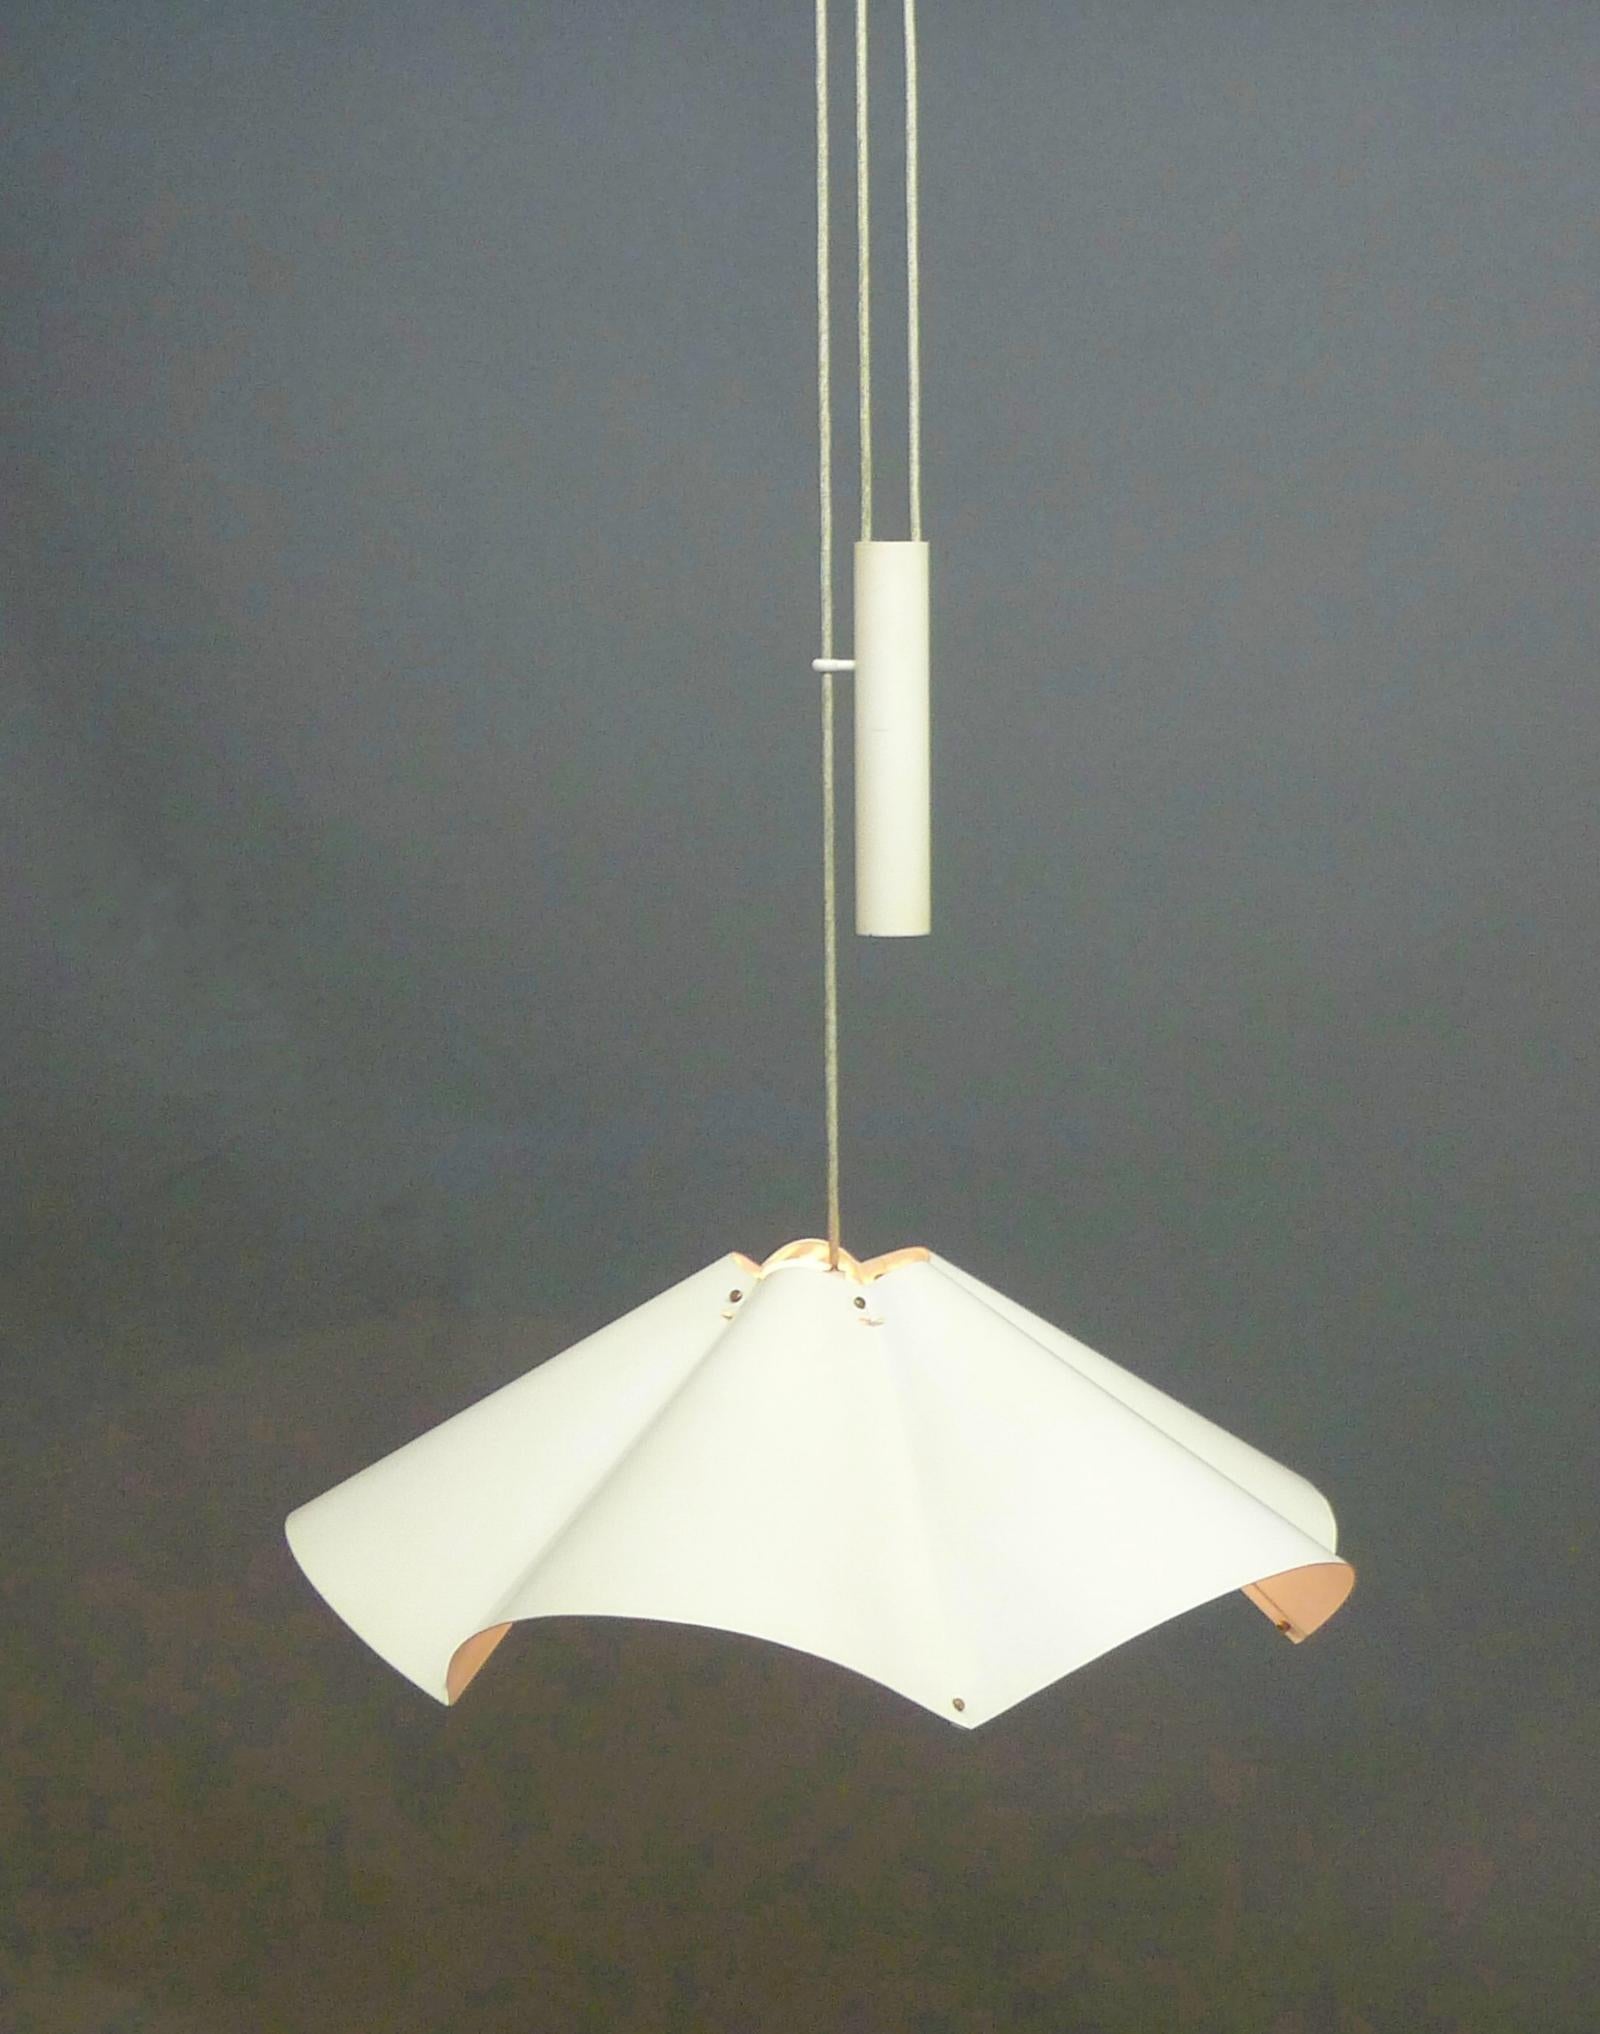 Gino Sarfatti for Arteluce, Rise and Fall Pendant Light, Model 2134, 1950s For Sale 7